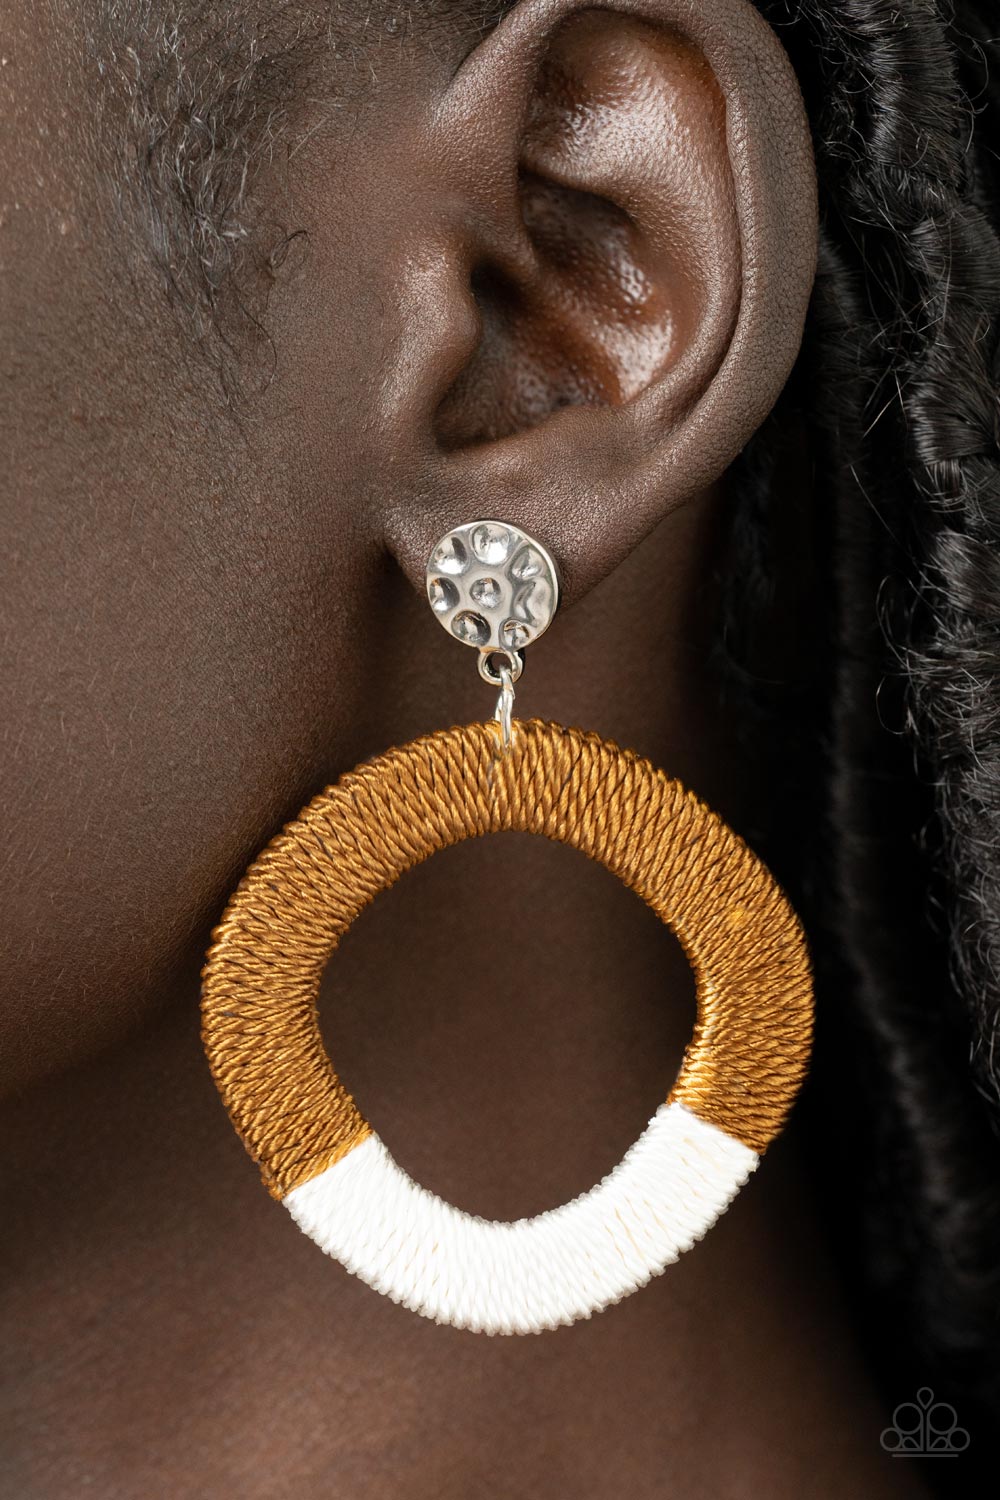 Thats a WRAPAROUND - Brown Threaded Earrings a hammered silver disc gives way to a wooden frame decoratively wrapped in shiny white and brown threaded accents, creating a colorful lure. Earring attaches to a standard post fitting.  Sold as one pair of post earrings.